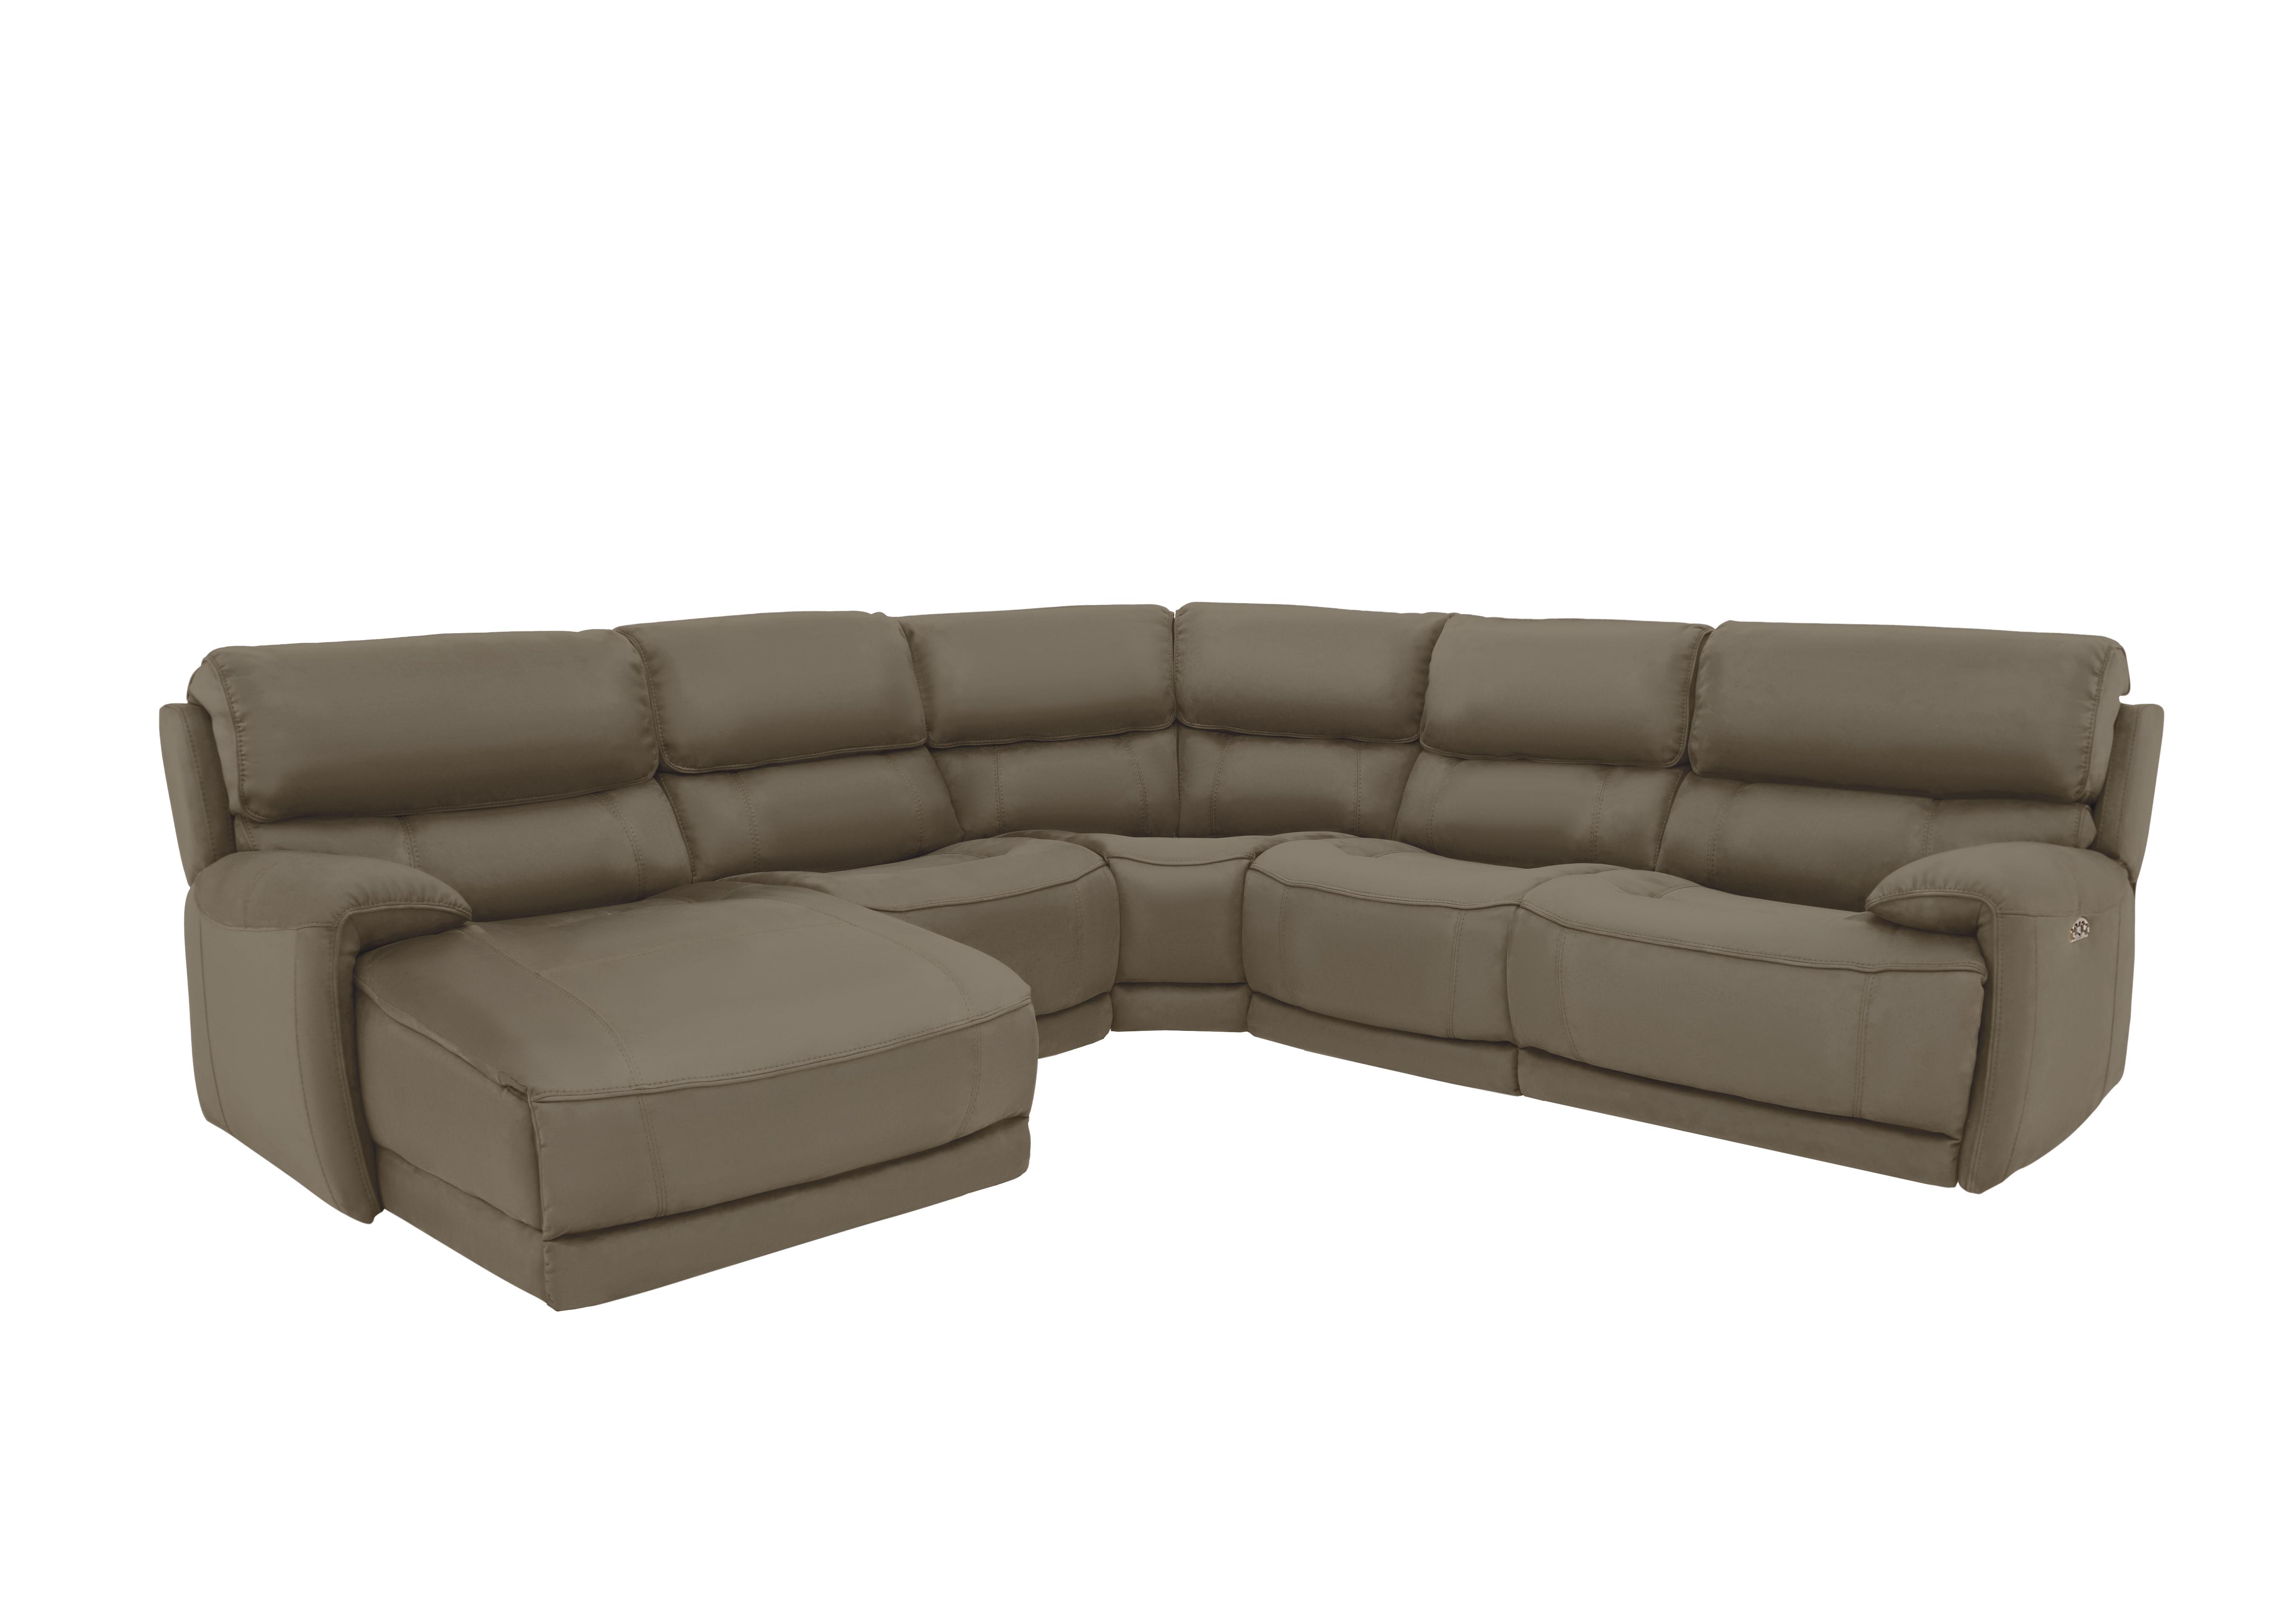 Link Leather Corner Chaise Power Sofa in Bv-042e Elephant on Furniture Village